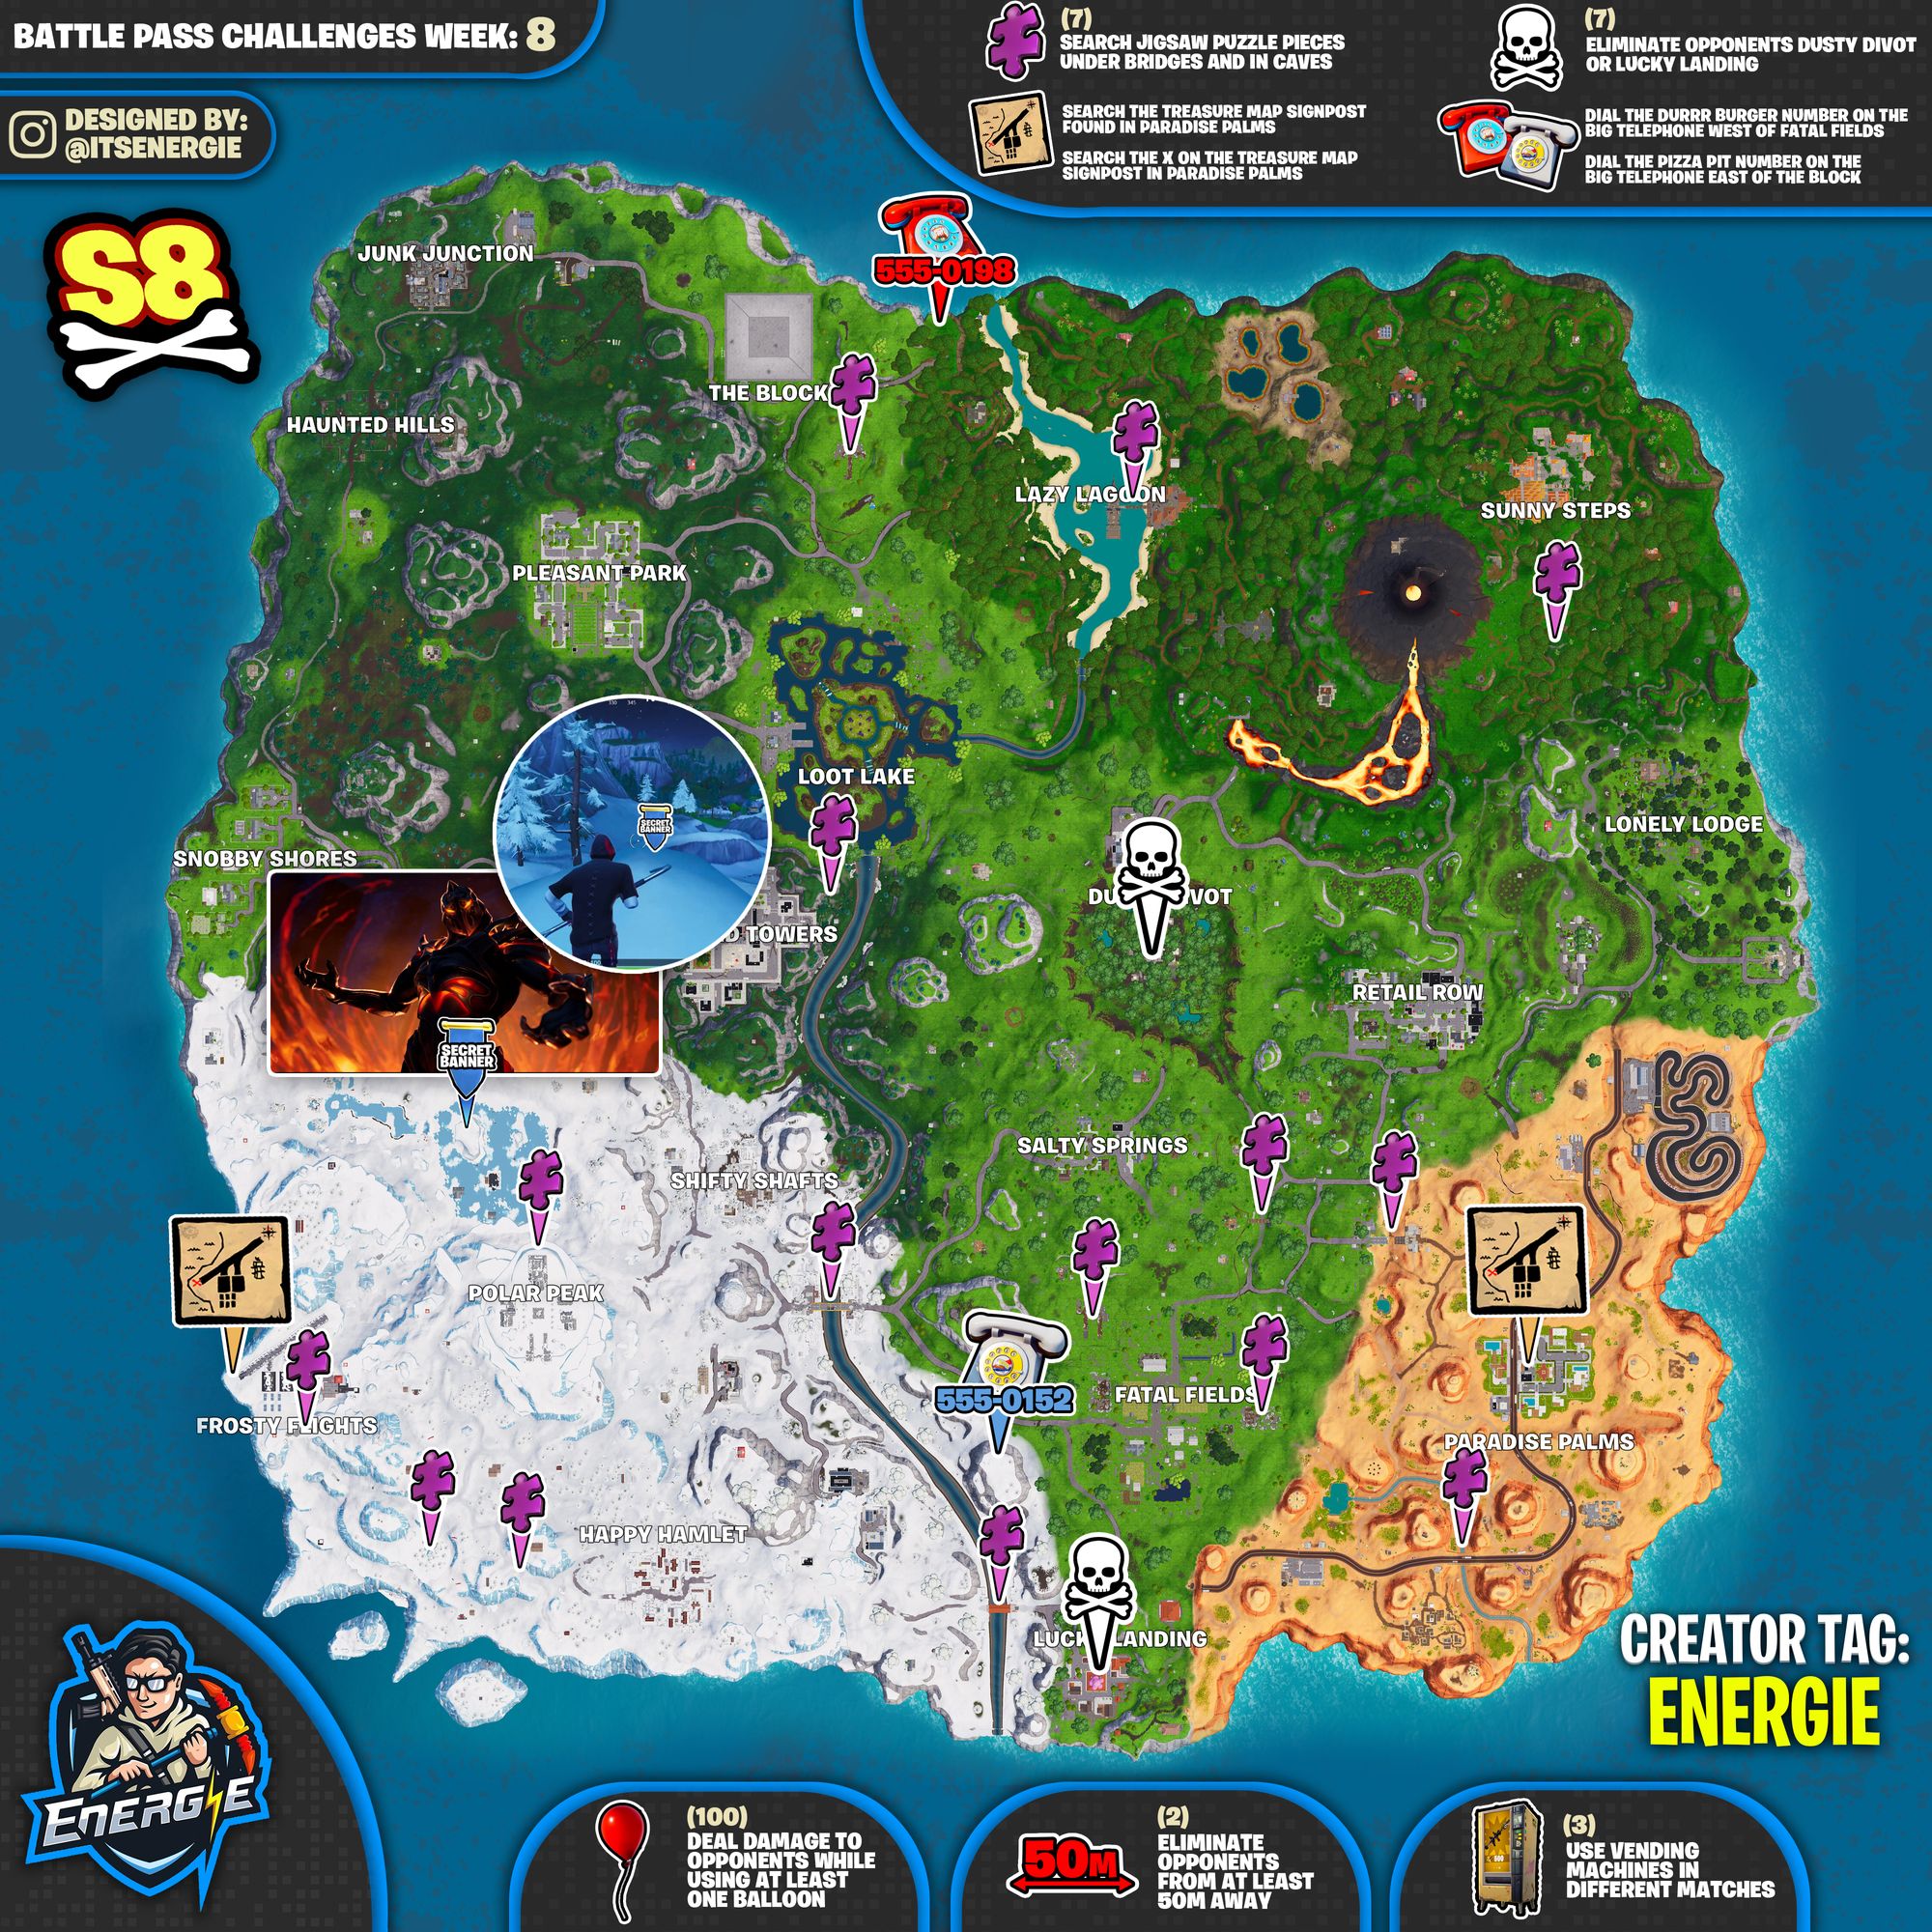 Season 8 Week 8 Challenges Available Now Fortnite News - if you need any assistance with week 8 s challenges itsenergie has provided one of his cheat sheets to help out